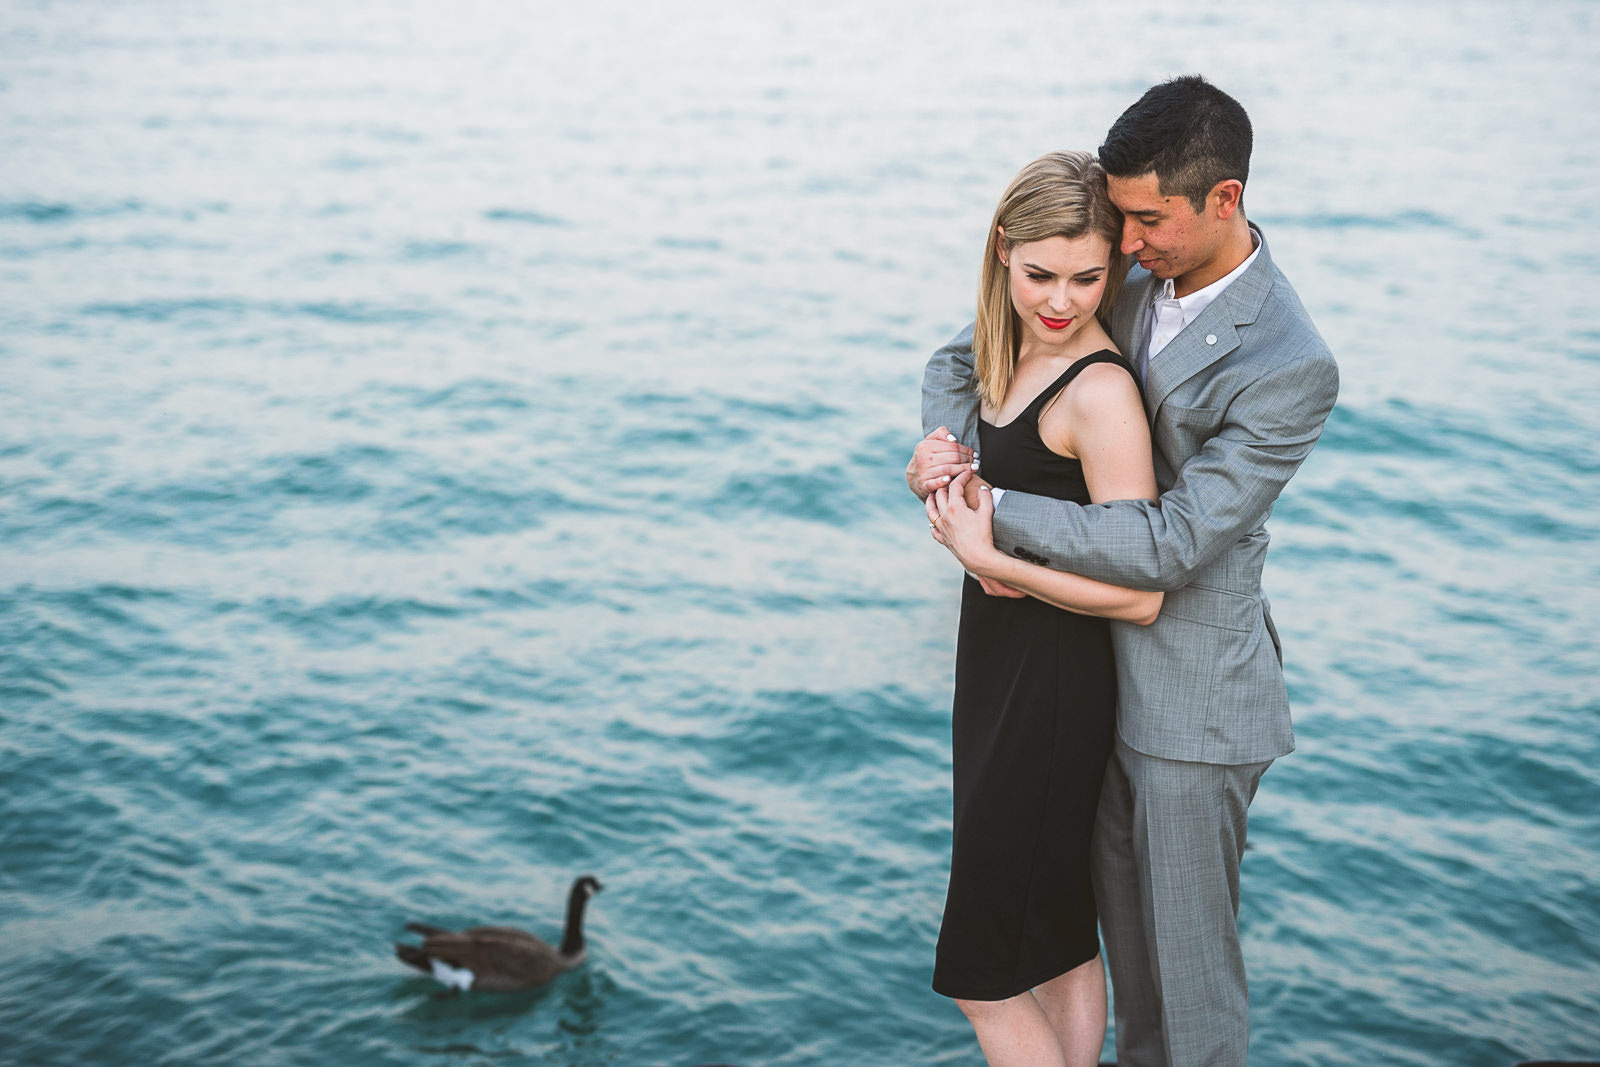 07 lake michigan engagement photos chicago - Krista + Russel // Downtown Chicago Engagement Session